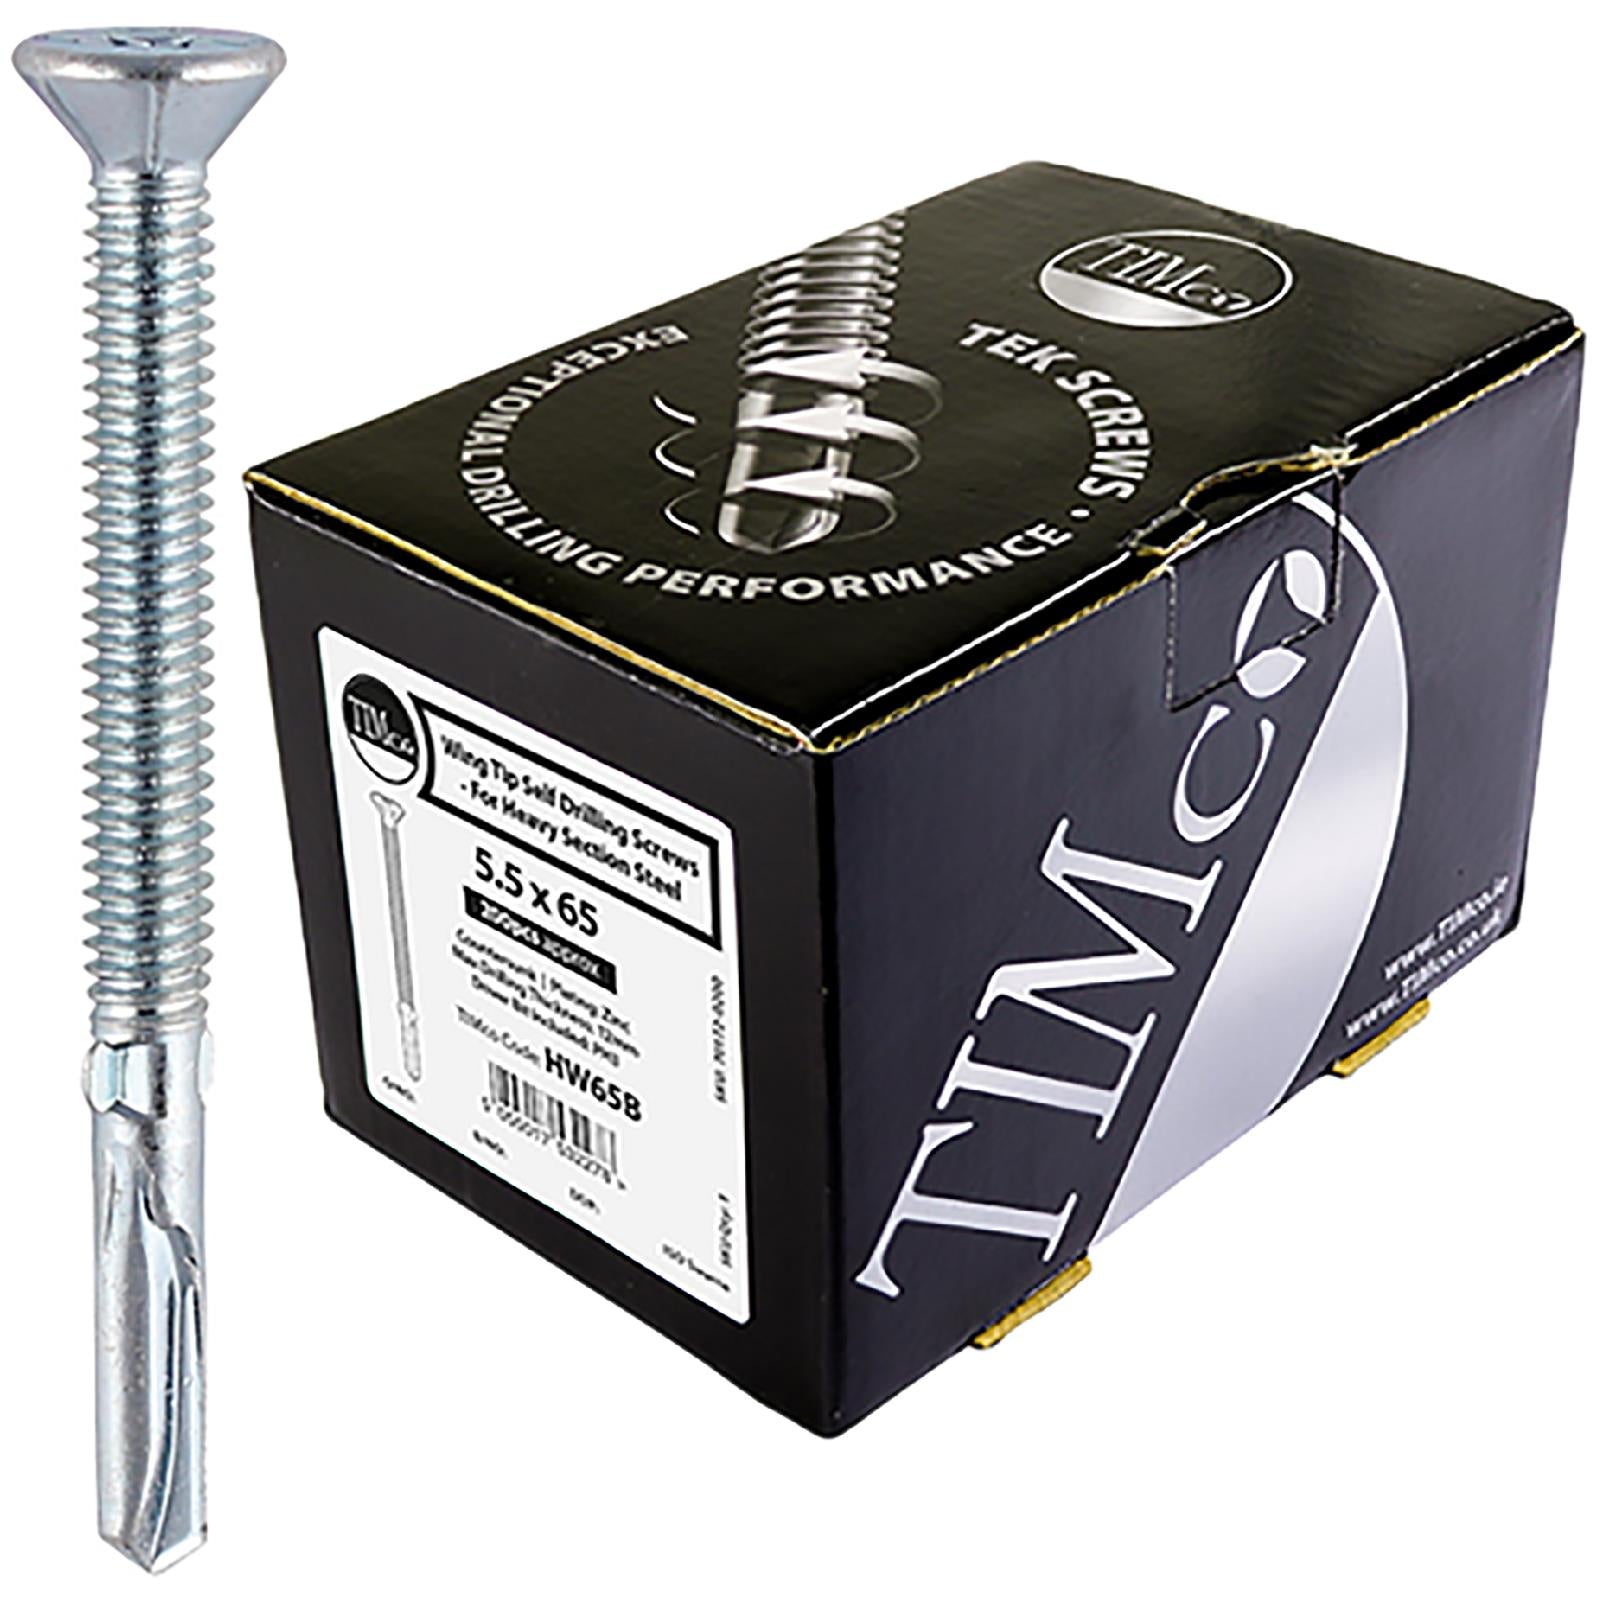 TIMCO Metal Construction TEK Screws Timber to Heavy Section Wing Tip Countersunk